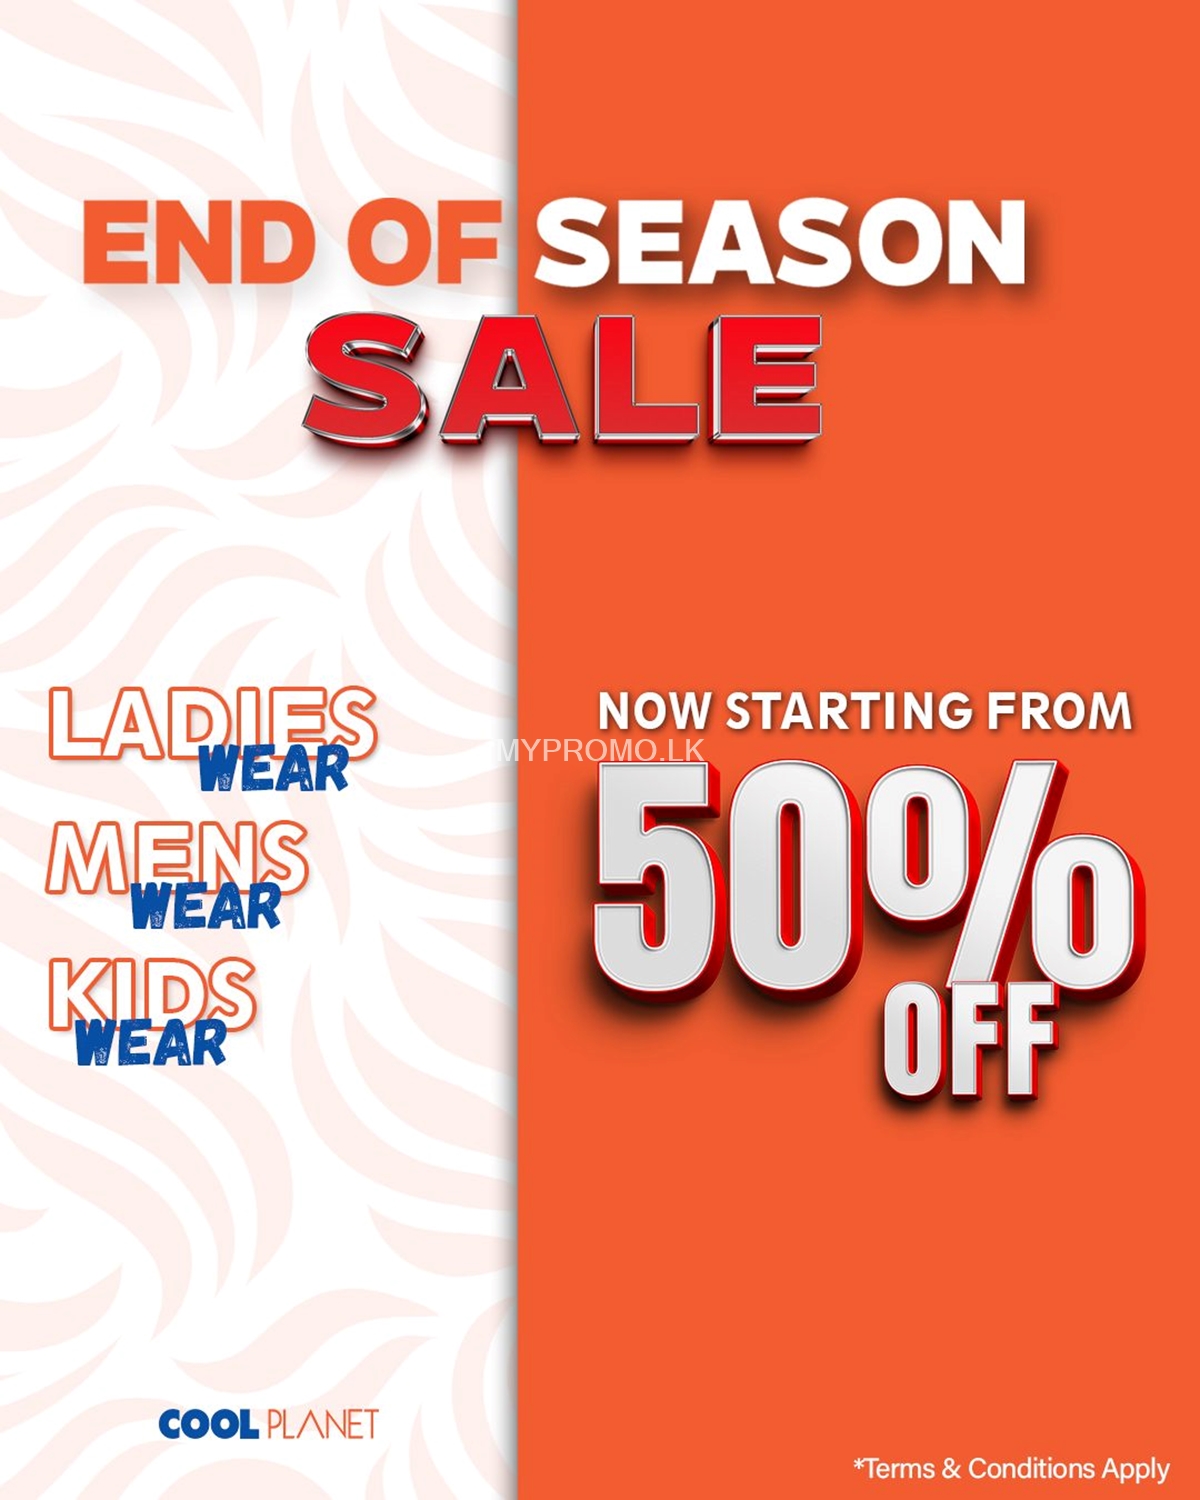 End of Season Sale at Cool Planet